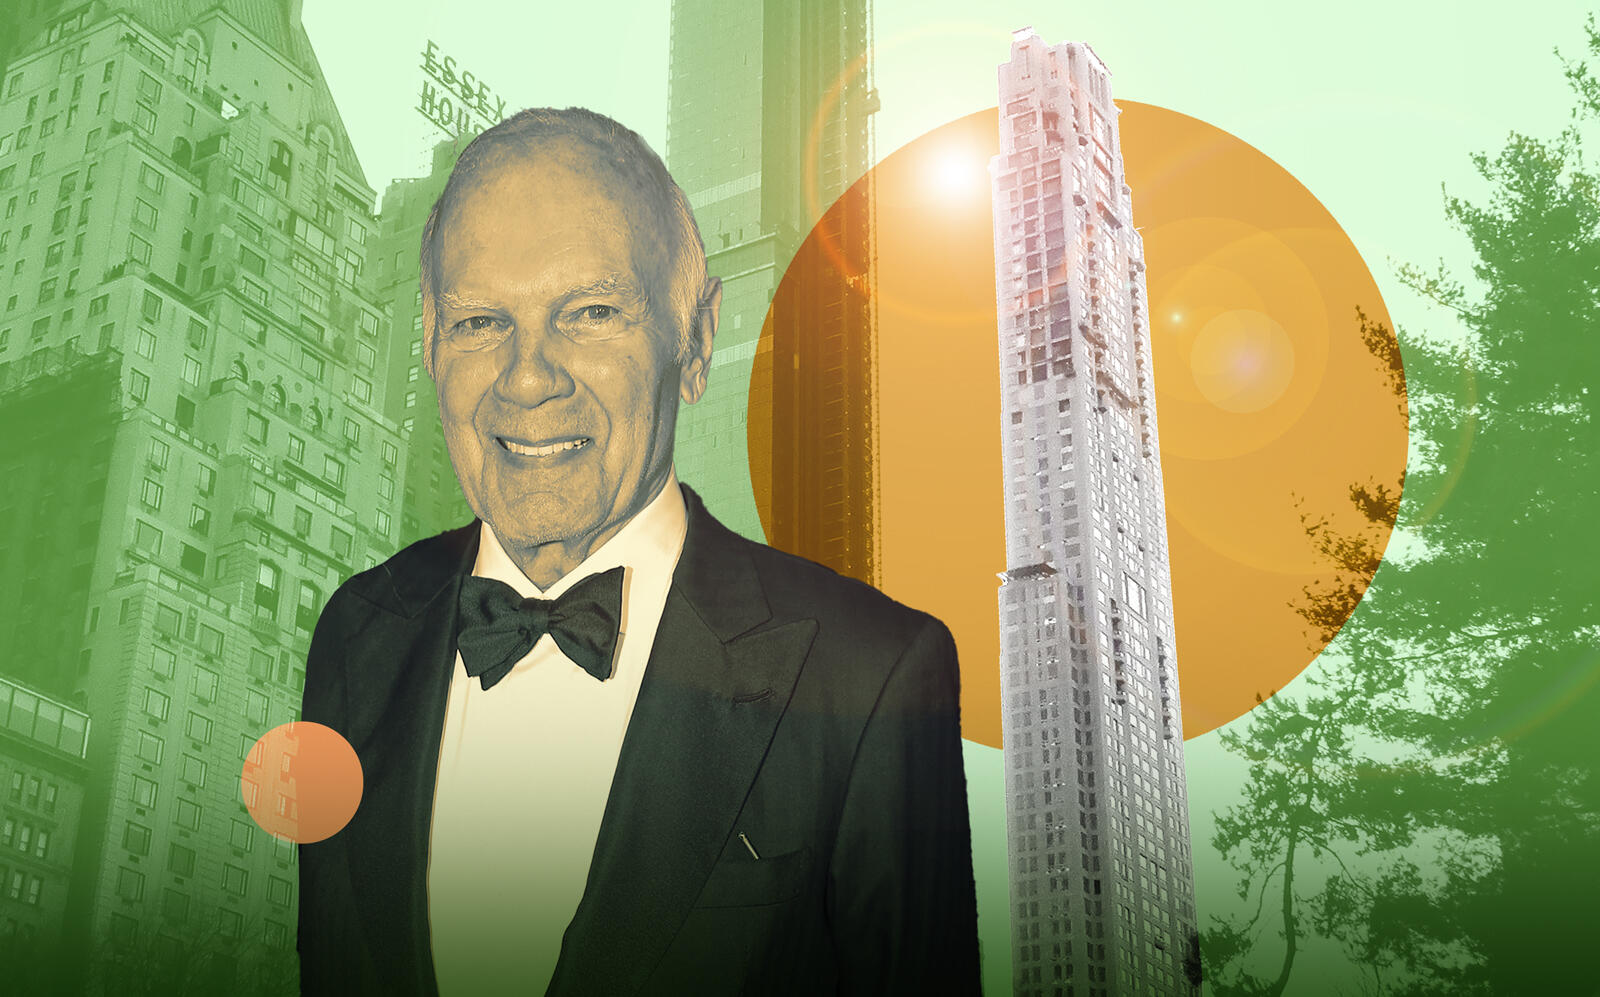 Vornado Realty Trust CEO Steven Roth with 220 Central Park South (Getty)